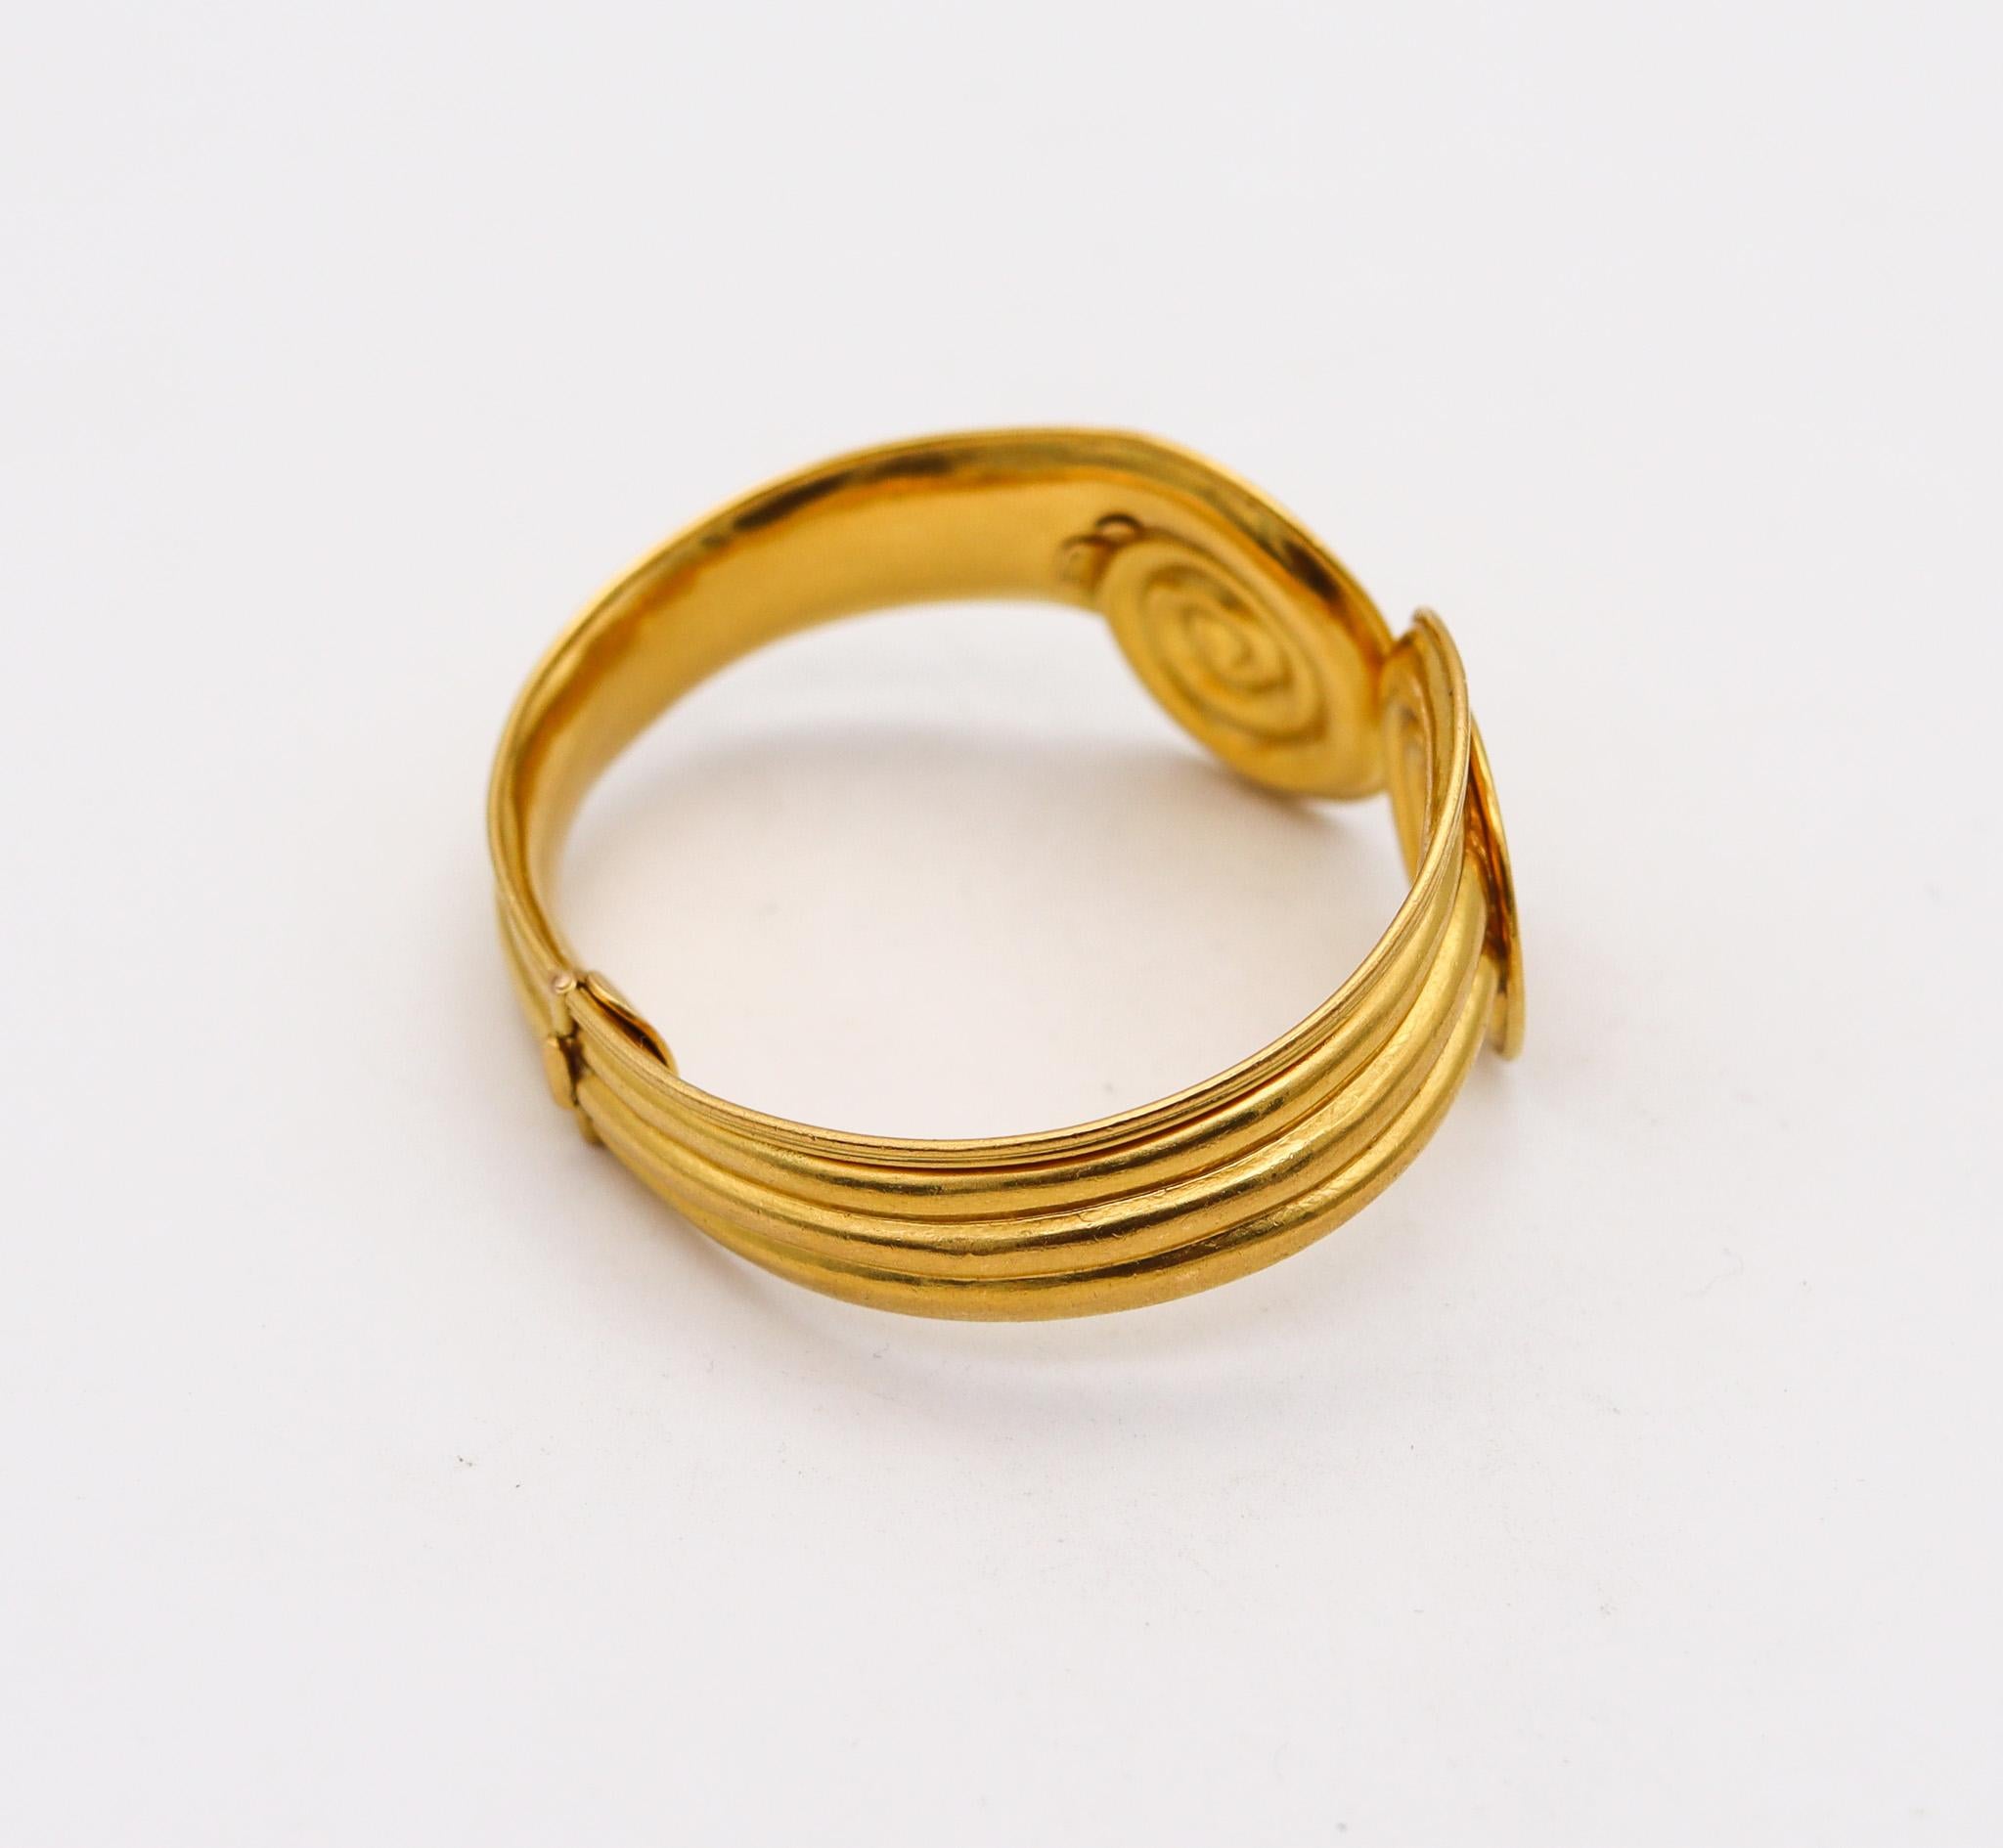 Lalaounis 1970 the Minoans and Mycenaeans Bangle Bracelet in Solid 18kt Gold In Excellent Condition For Sale In Miami, FL